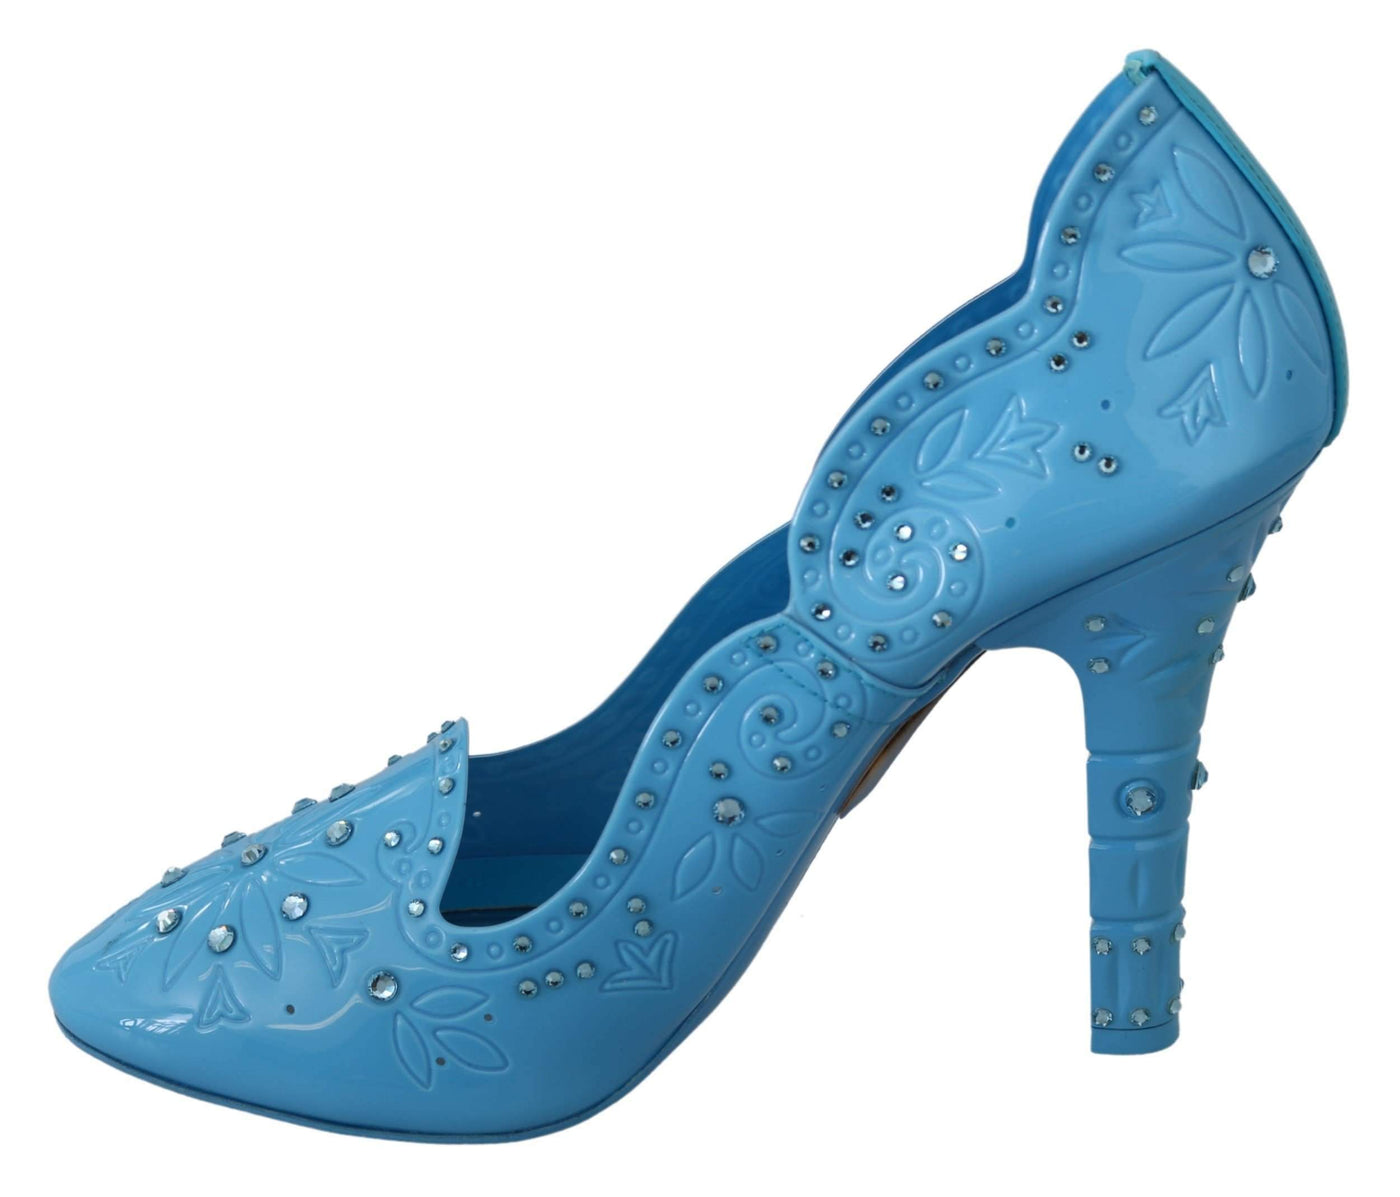 Dolce & Gabbana Blue Crystal Floral CINDERELLA Heels Shoes #women, Blue, Brand_Dolce & Gabbana, Dolce & Gabbana, EU39/US8.5, feed-agegroup-adult, feed-color-blue, feed-gender-female, feed-size-US8.5, Gender_Women, Pumps - Women - Shoes, Shoes - New Arrivals at SEYMAYKA